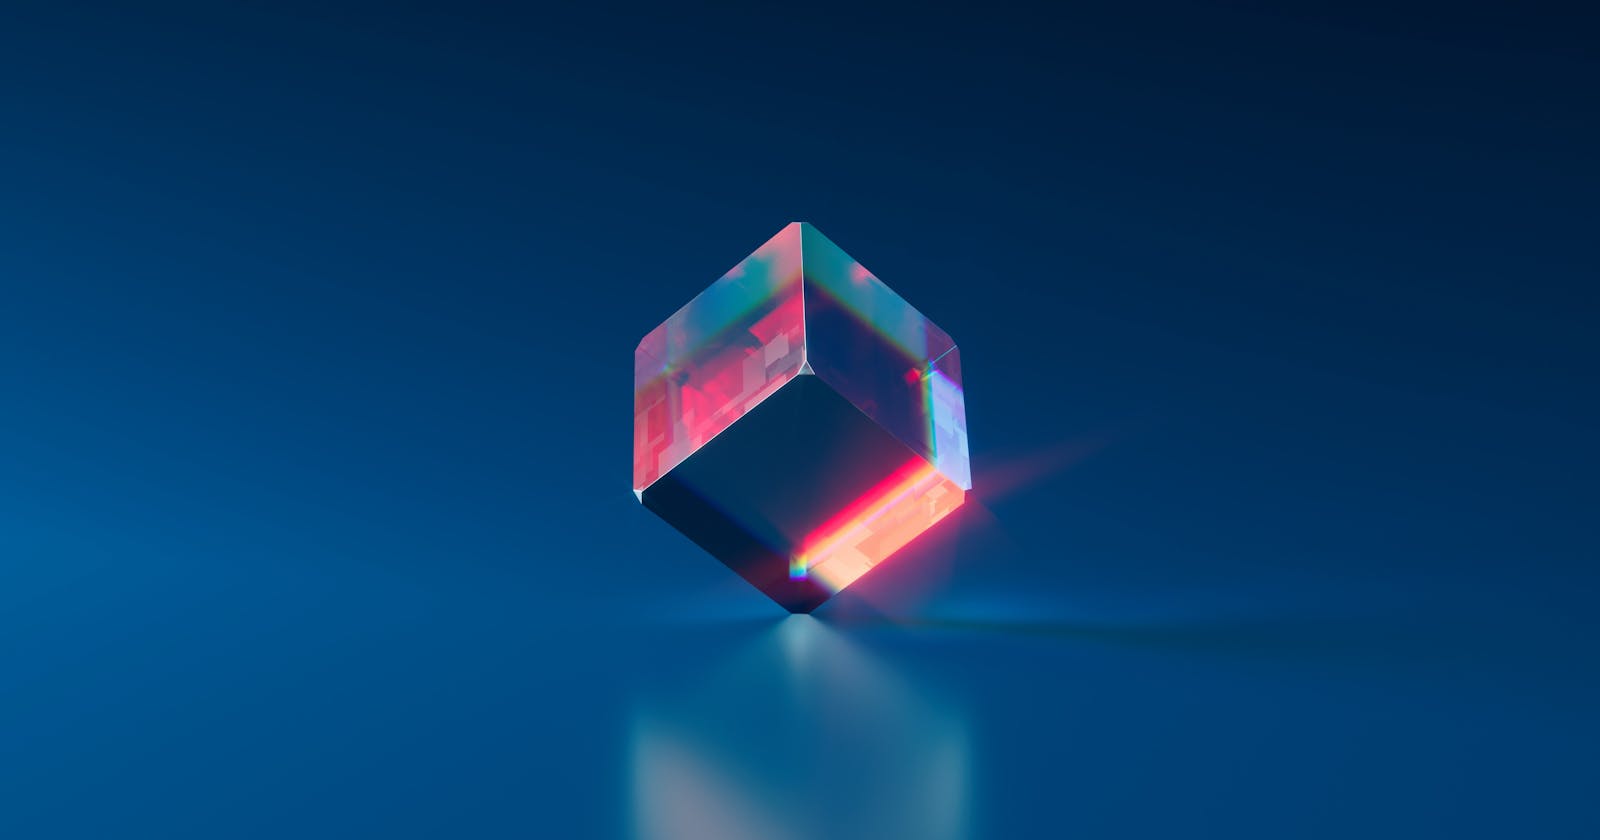 Diving into the world of WebGL with Three.js